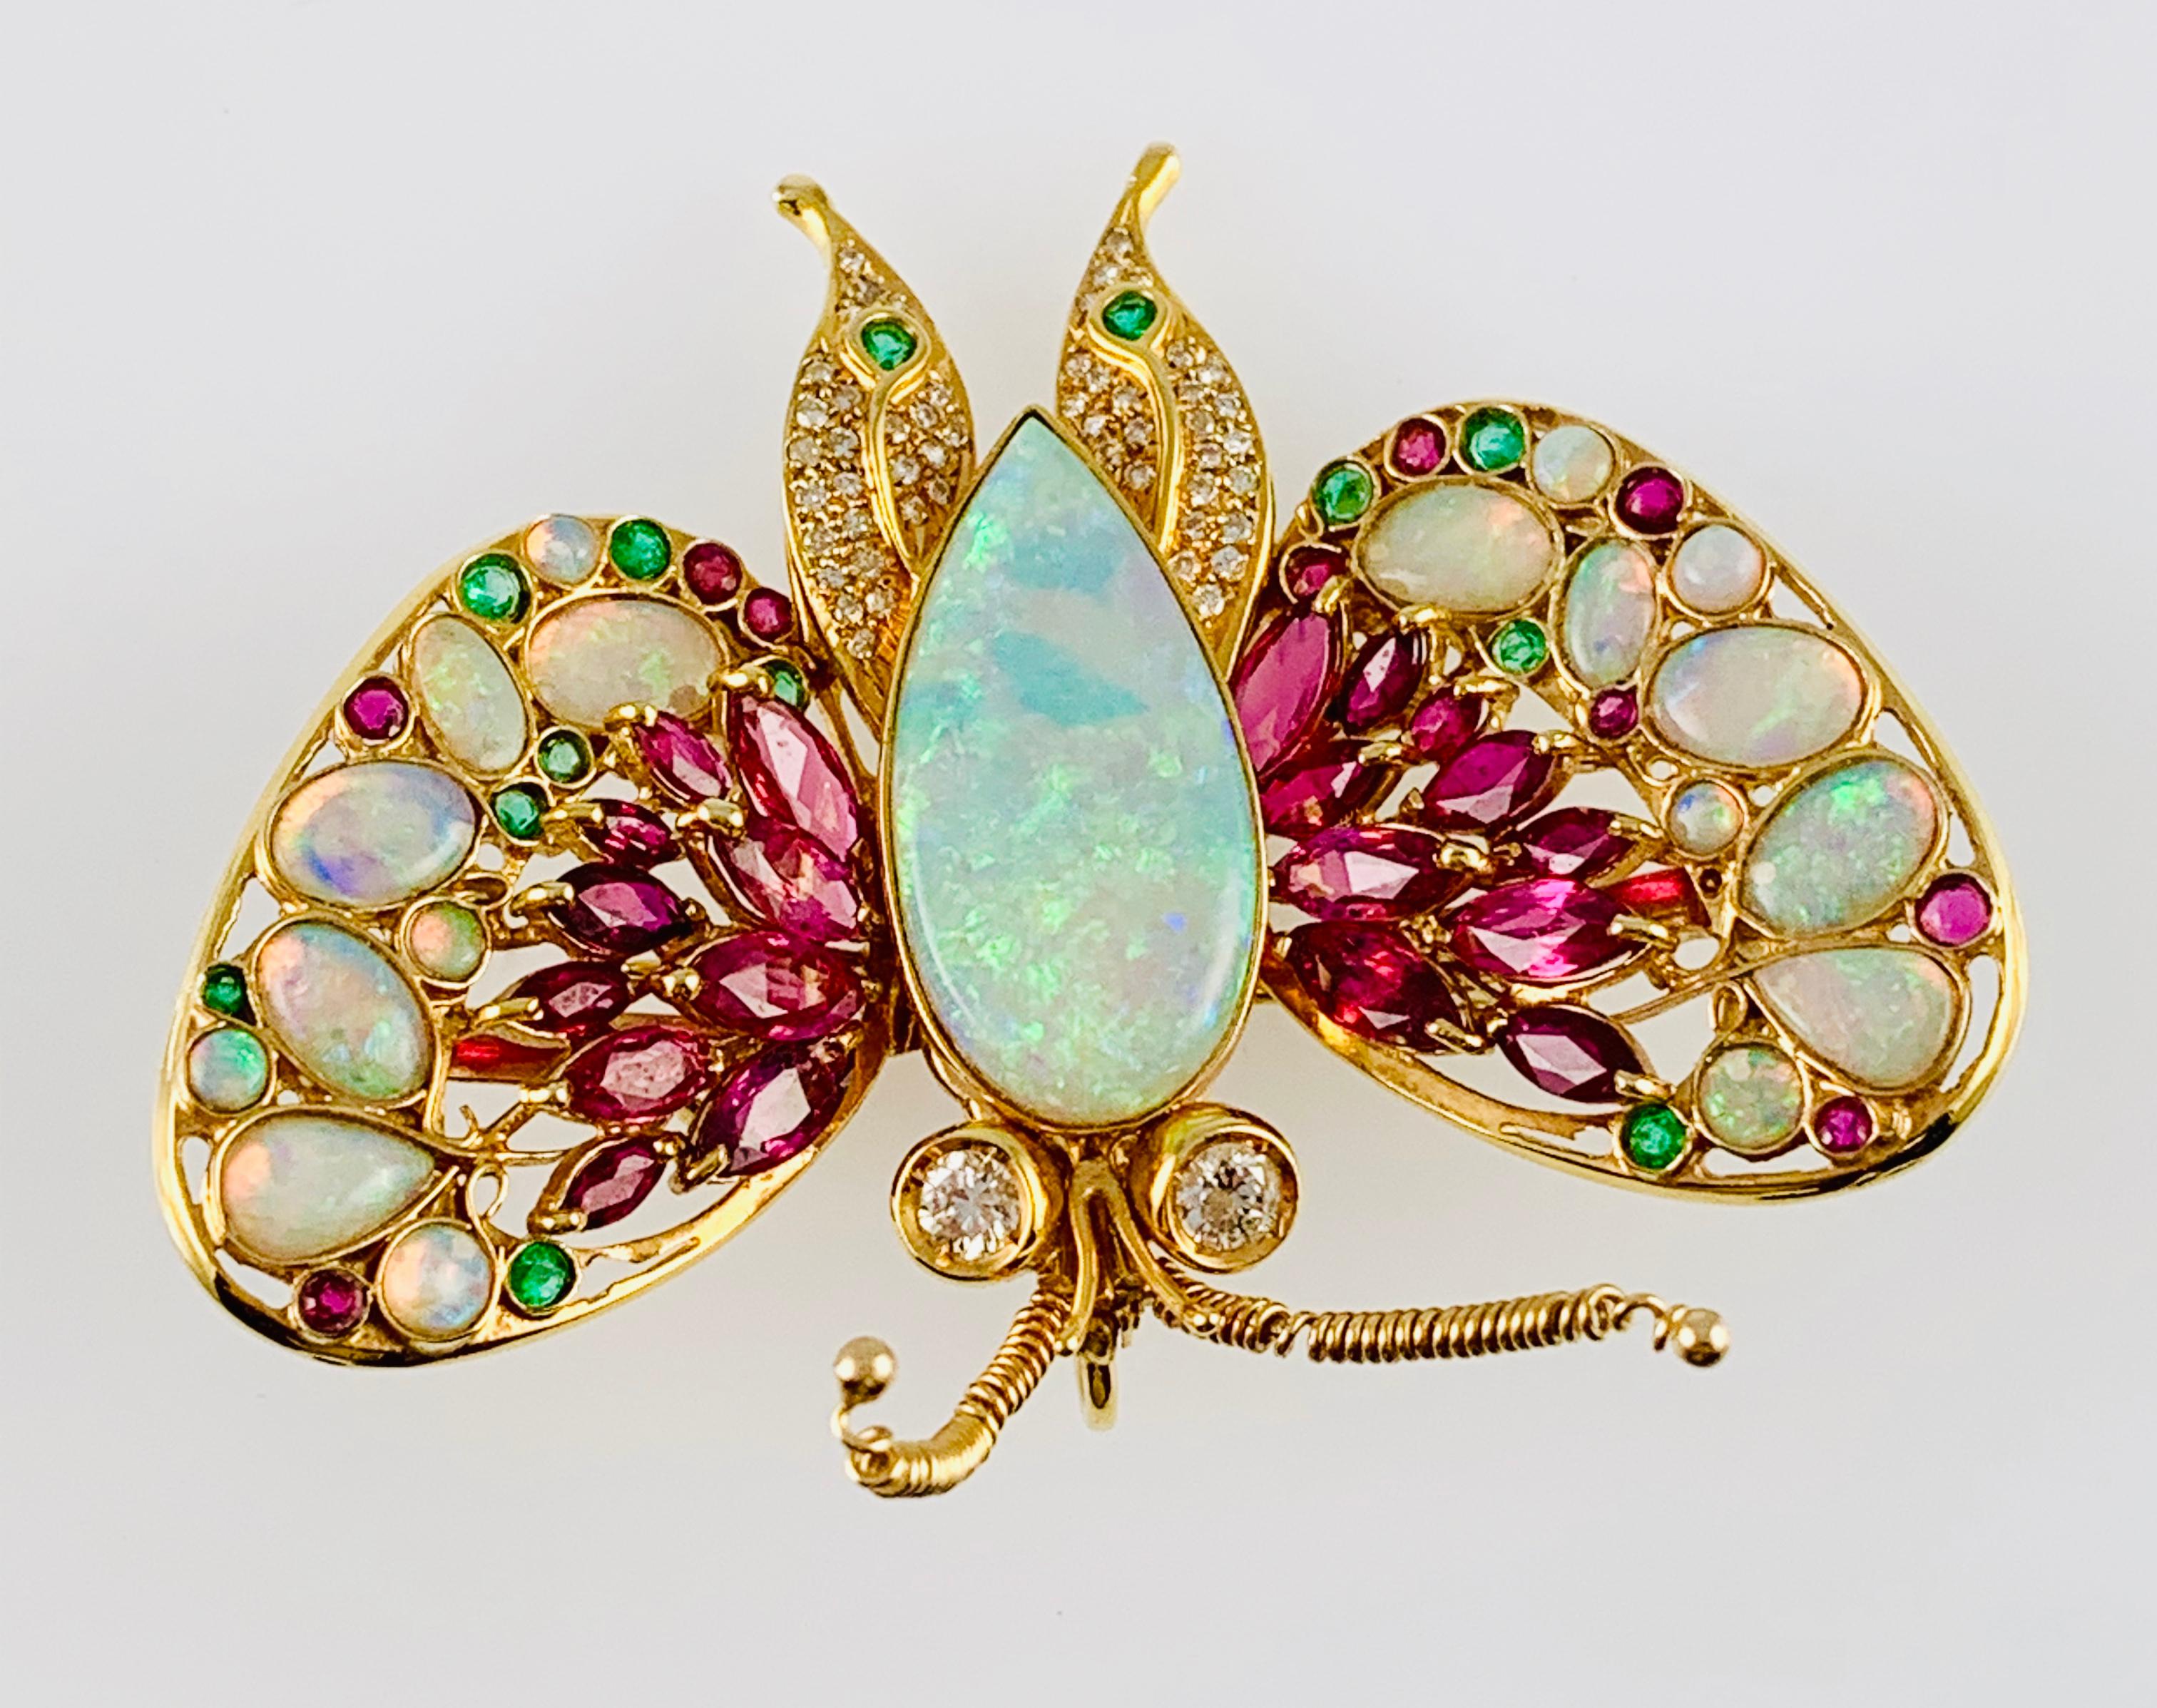 Absolutely Stunning Vintage Butterfly Brooch! Made in 14K yellow Gold and it dominated by a very Large and Colorful Pear Shaped Opal Body and wings that are accented by Diamonds, Rubies and Emeralds! The Butterfly has two bezel set diamonds for